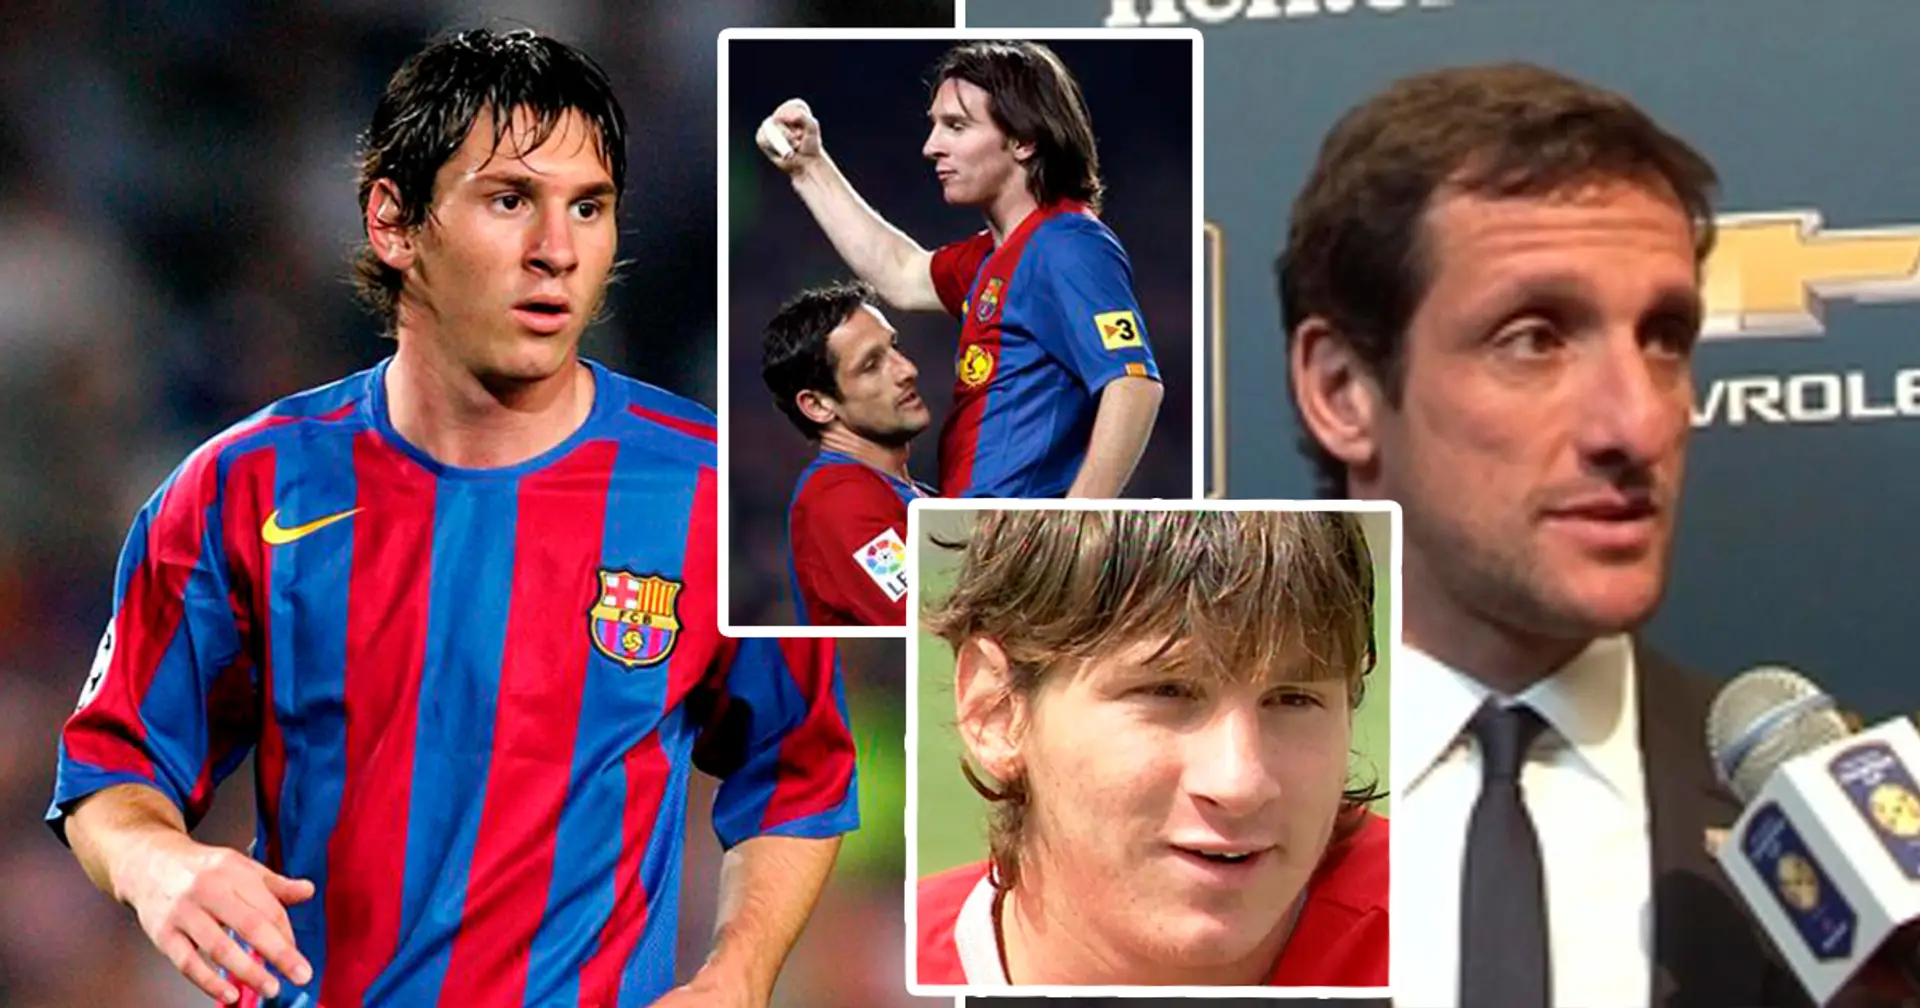 'I tried to kick him but I couldn't': Juliano Belletti remembers how 16-year-old Lionel Messi embarrassed him in training